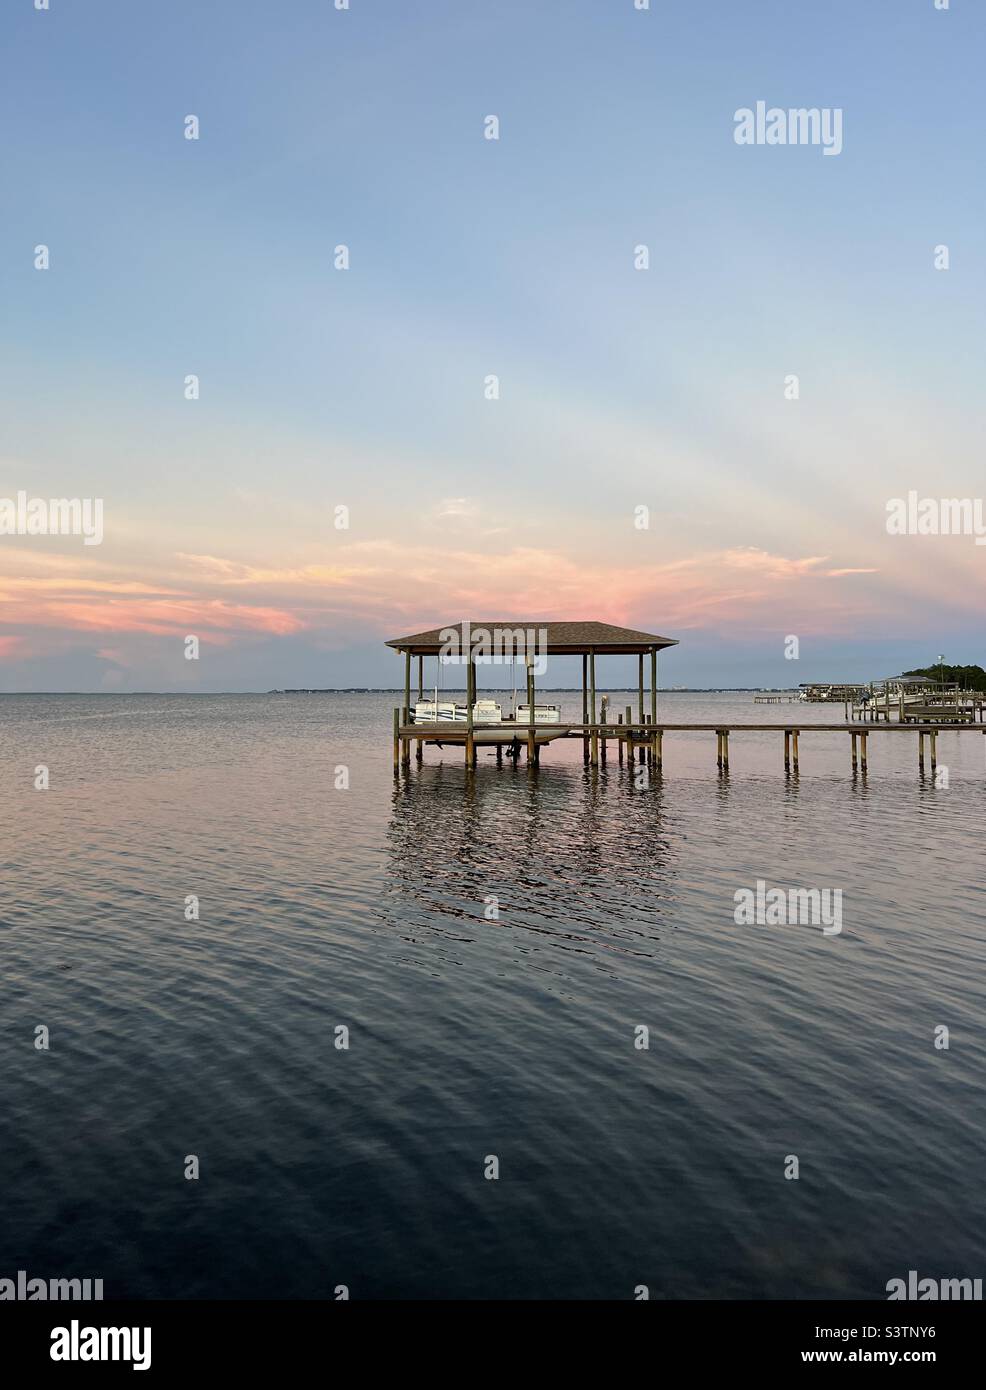 Sunset over bay water with antisolar rays and boat dock Stock Photo